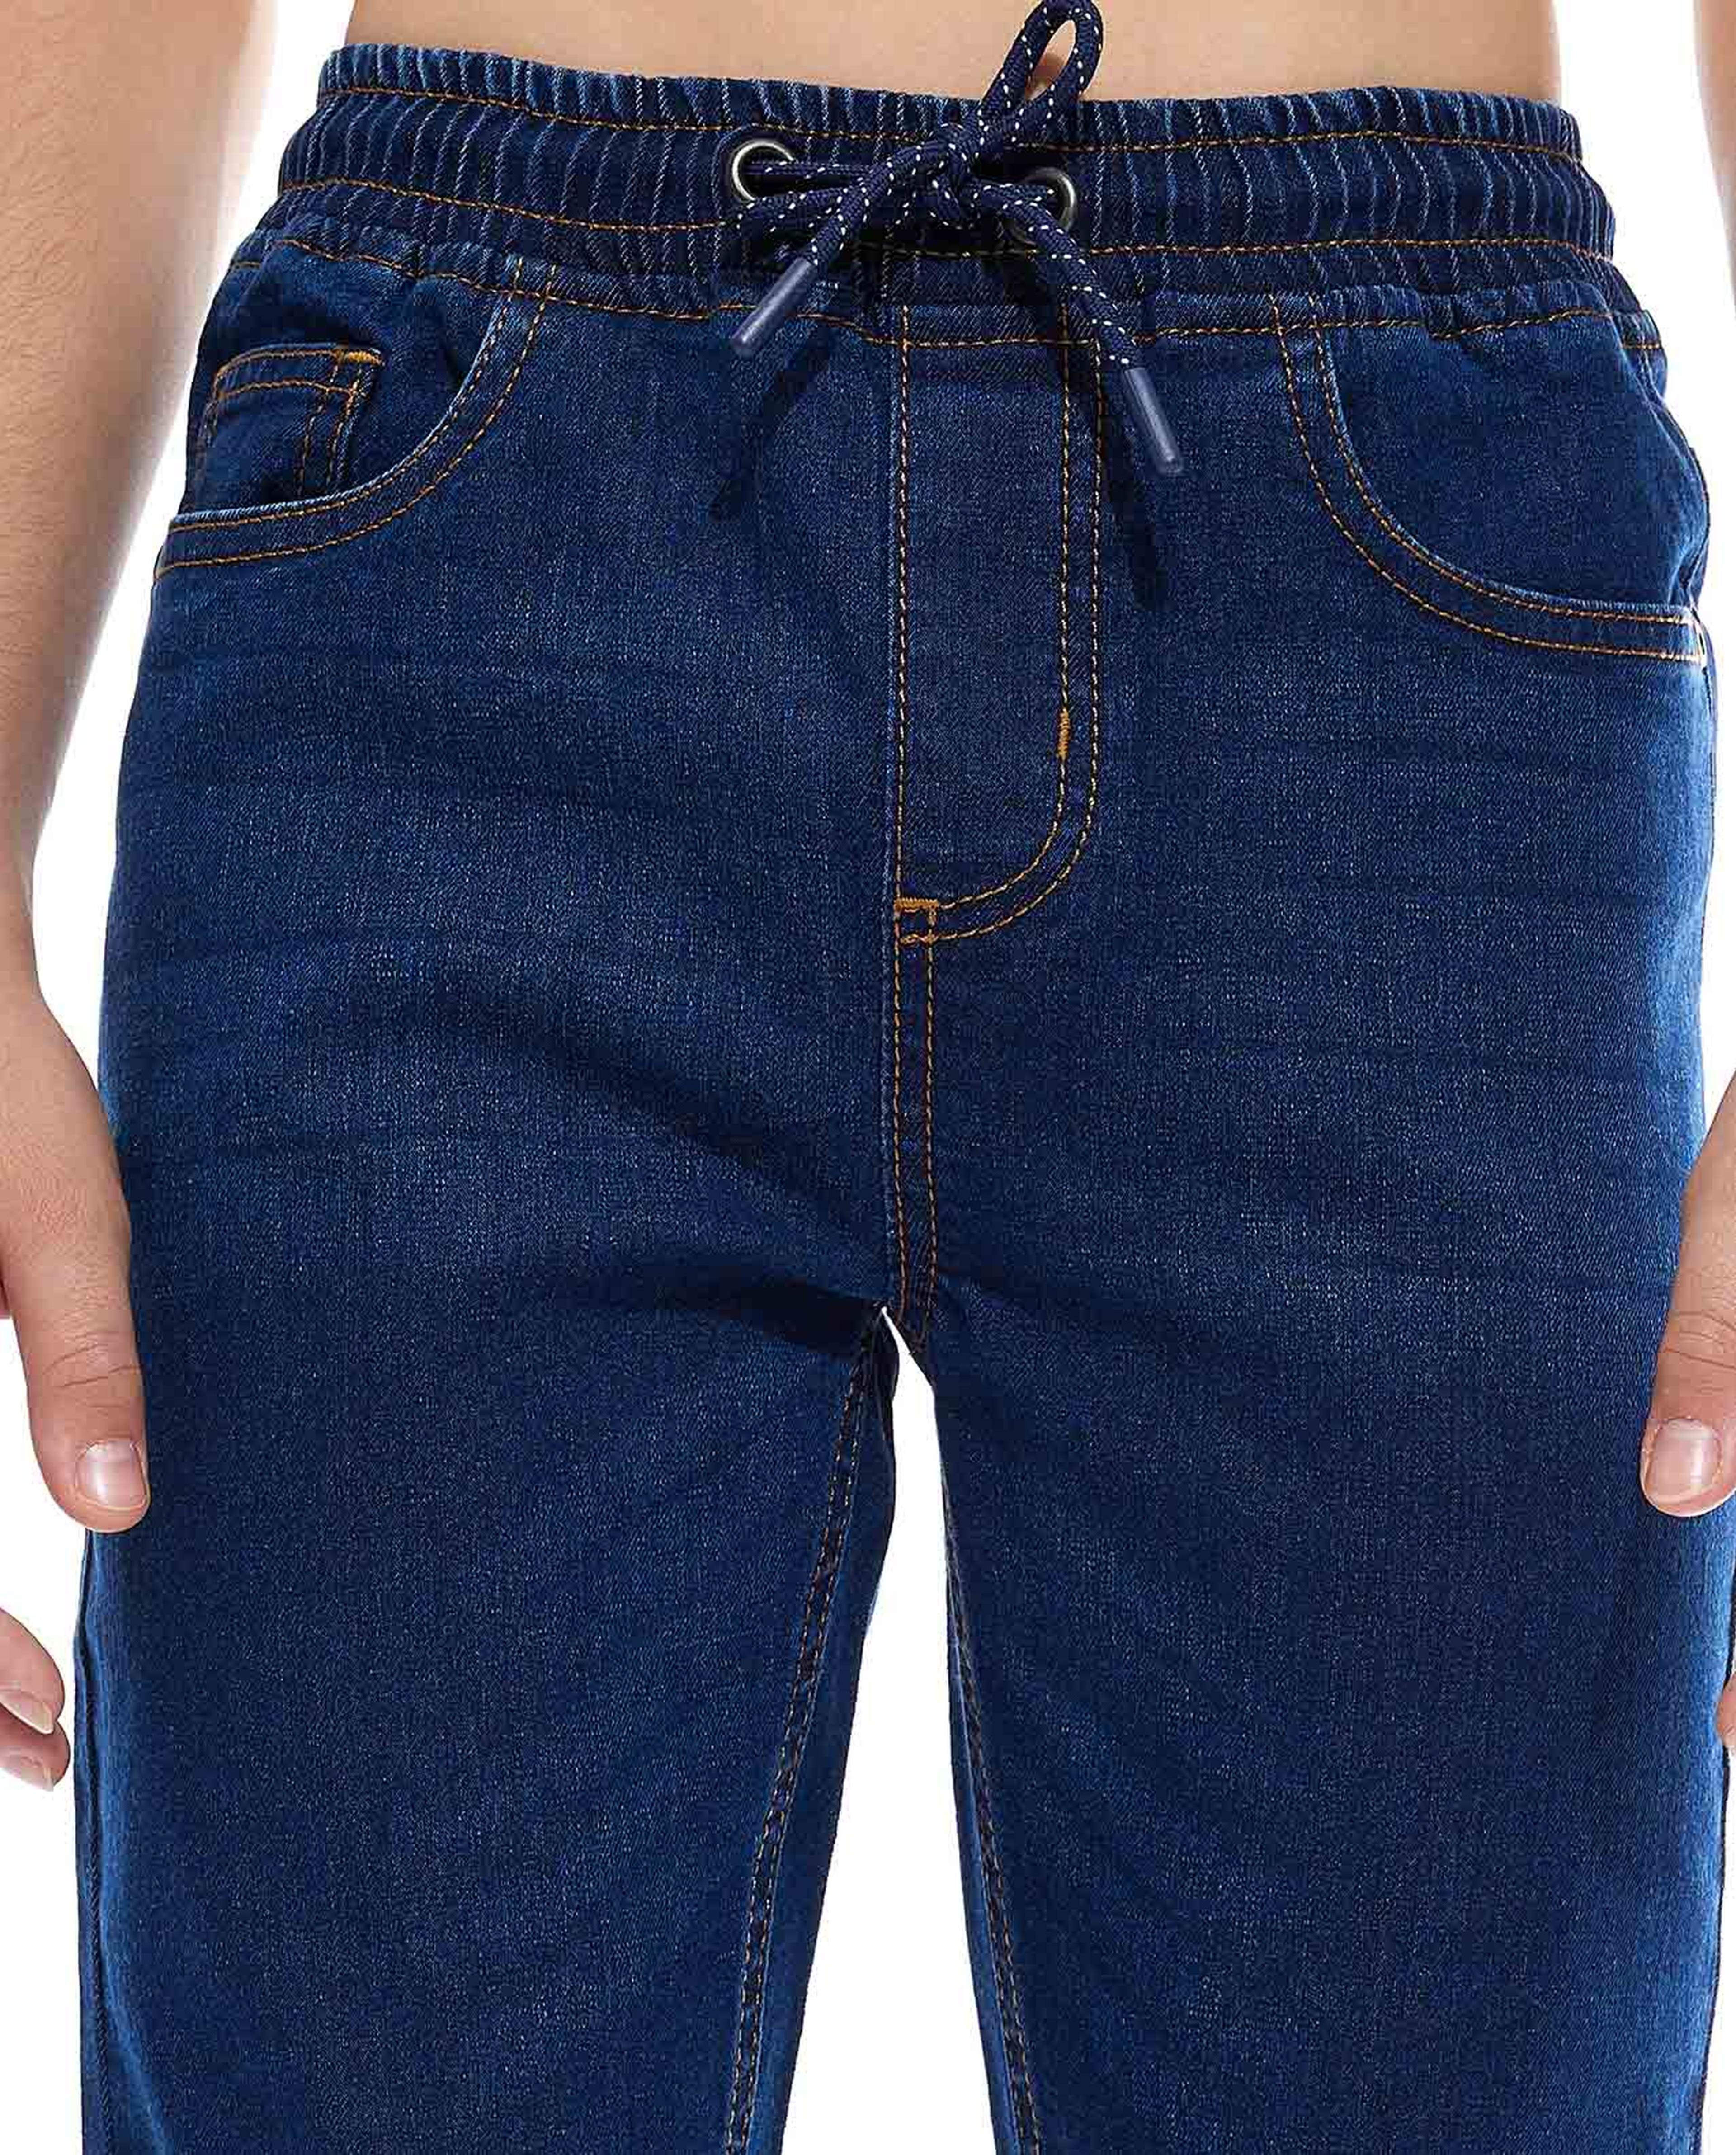 Washed Jeans with Drawstring Waist